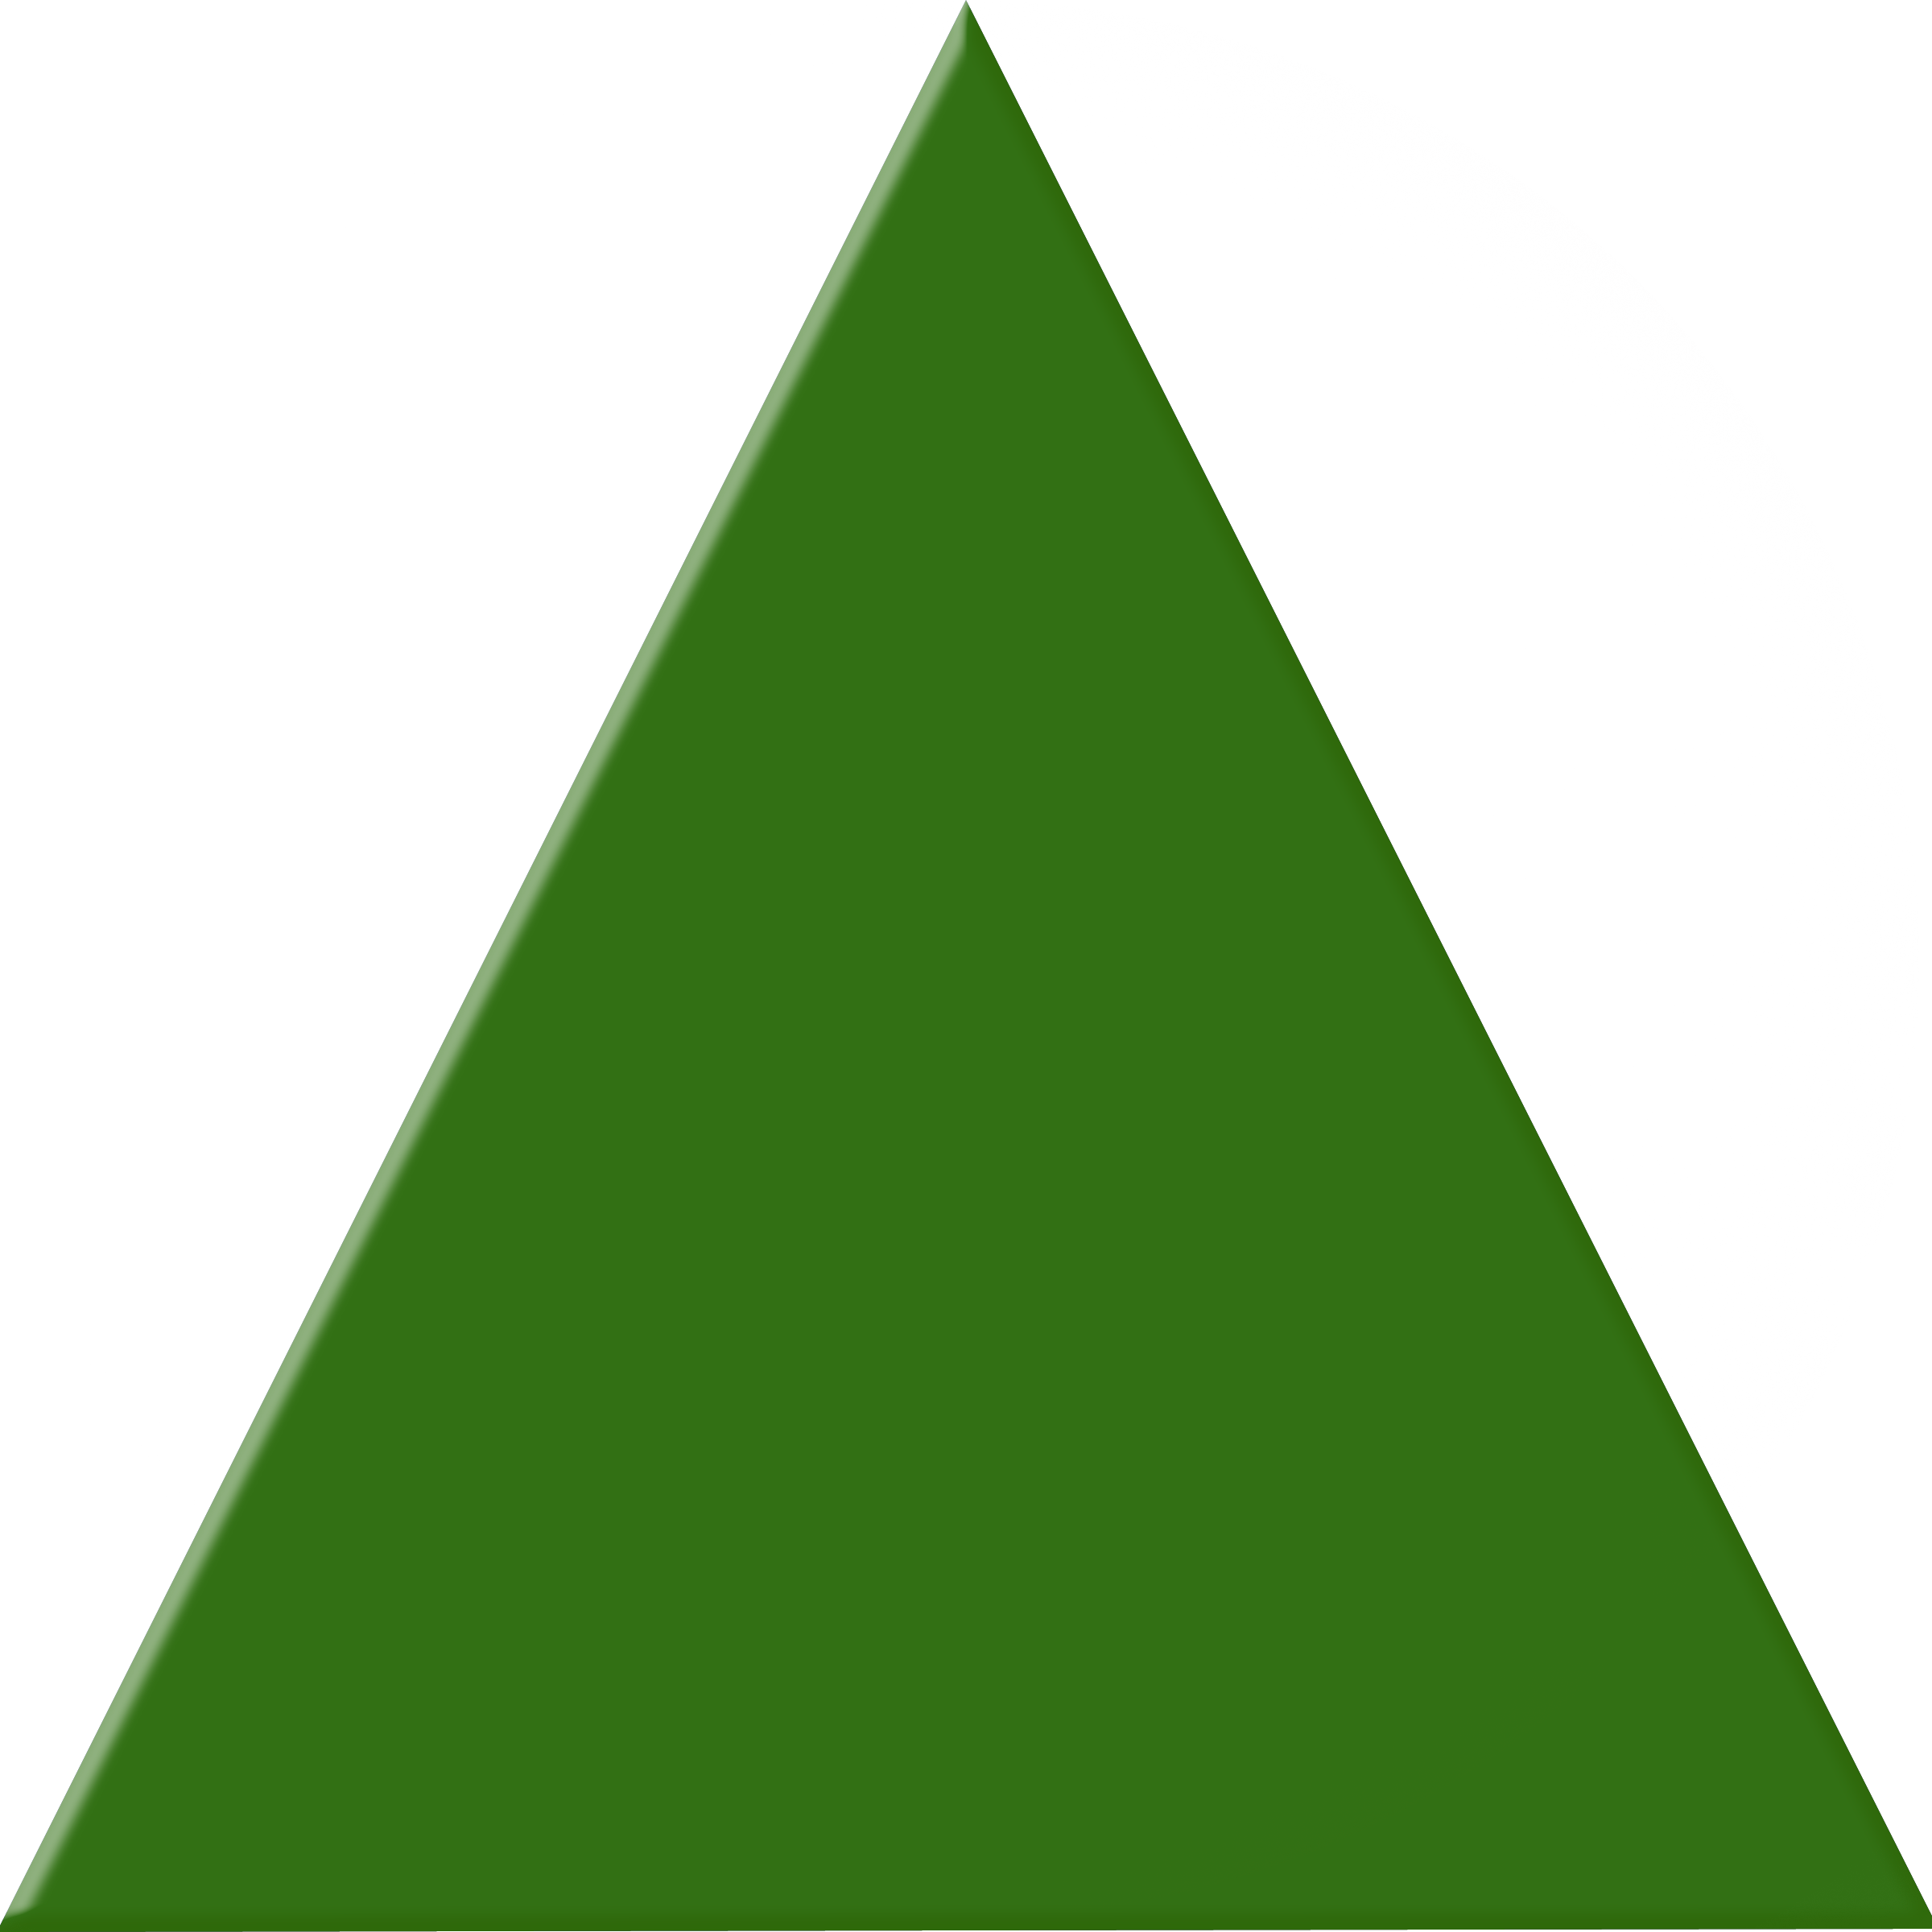 Red and Green Triangle Logo - Green triangle Logos